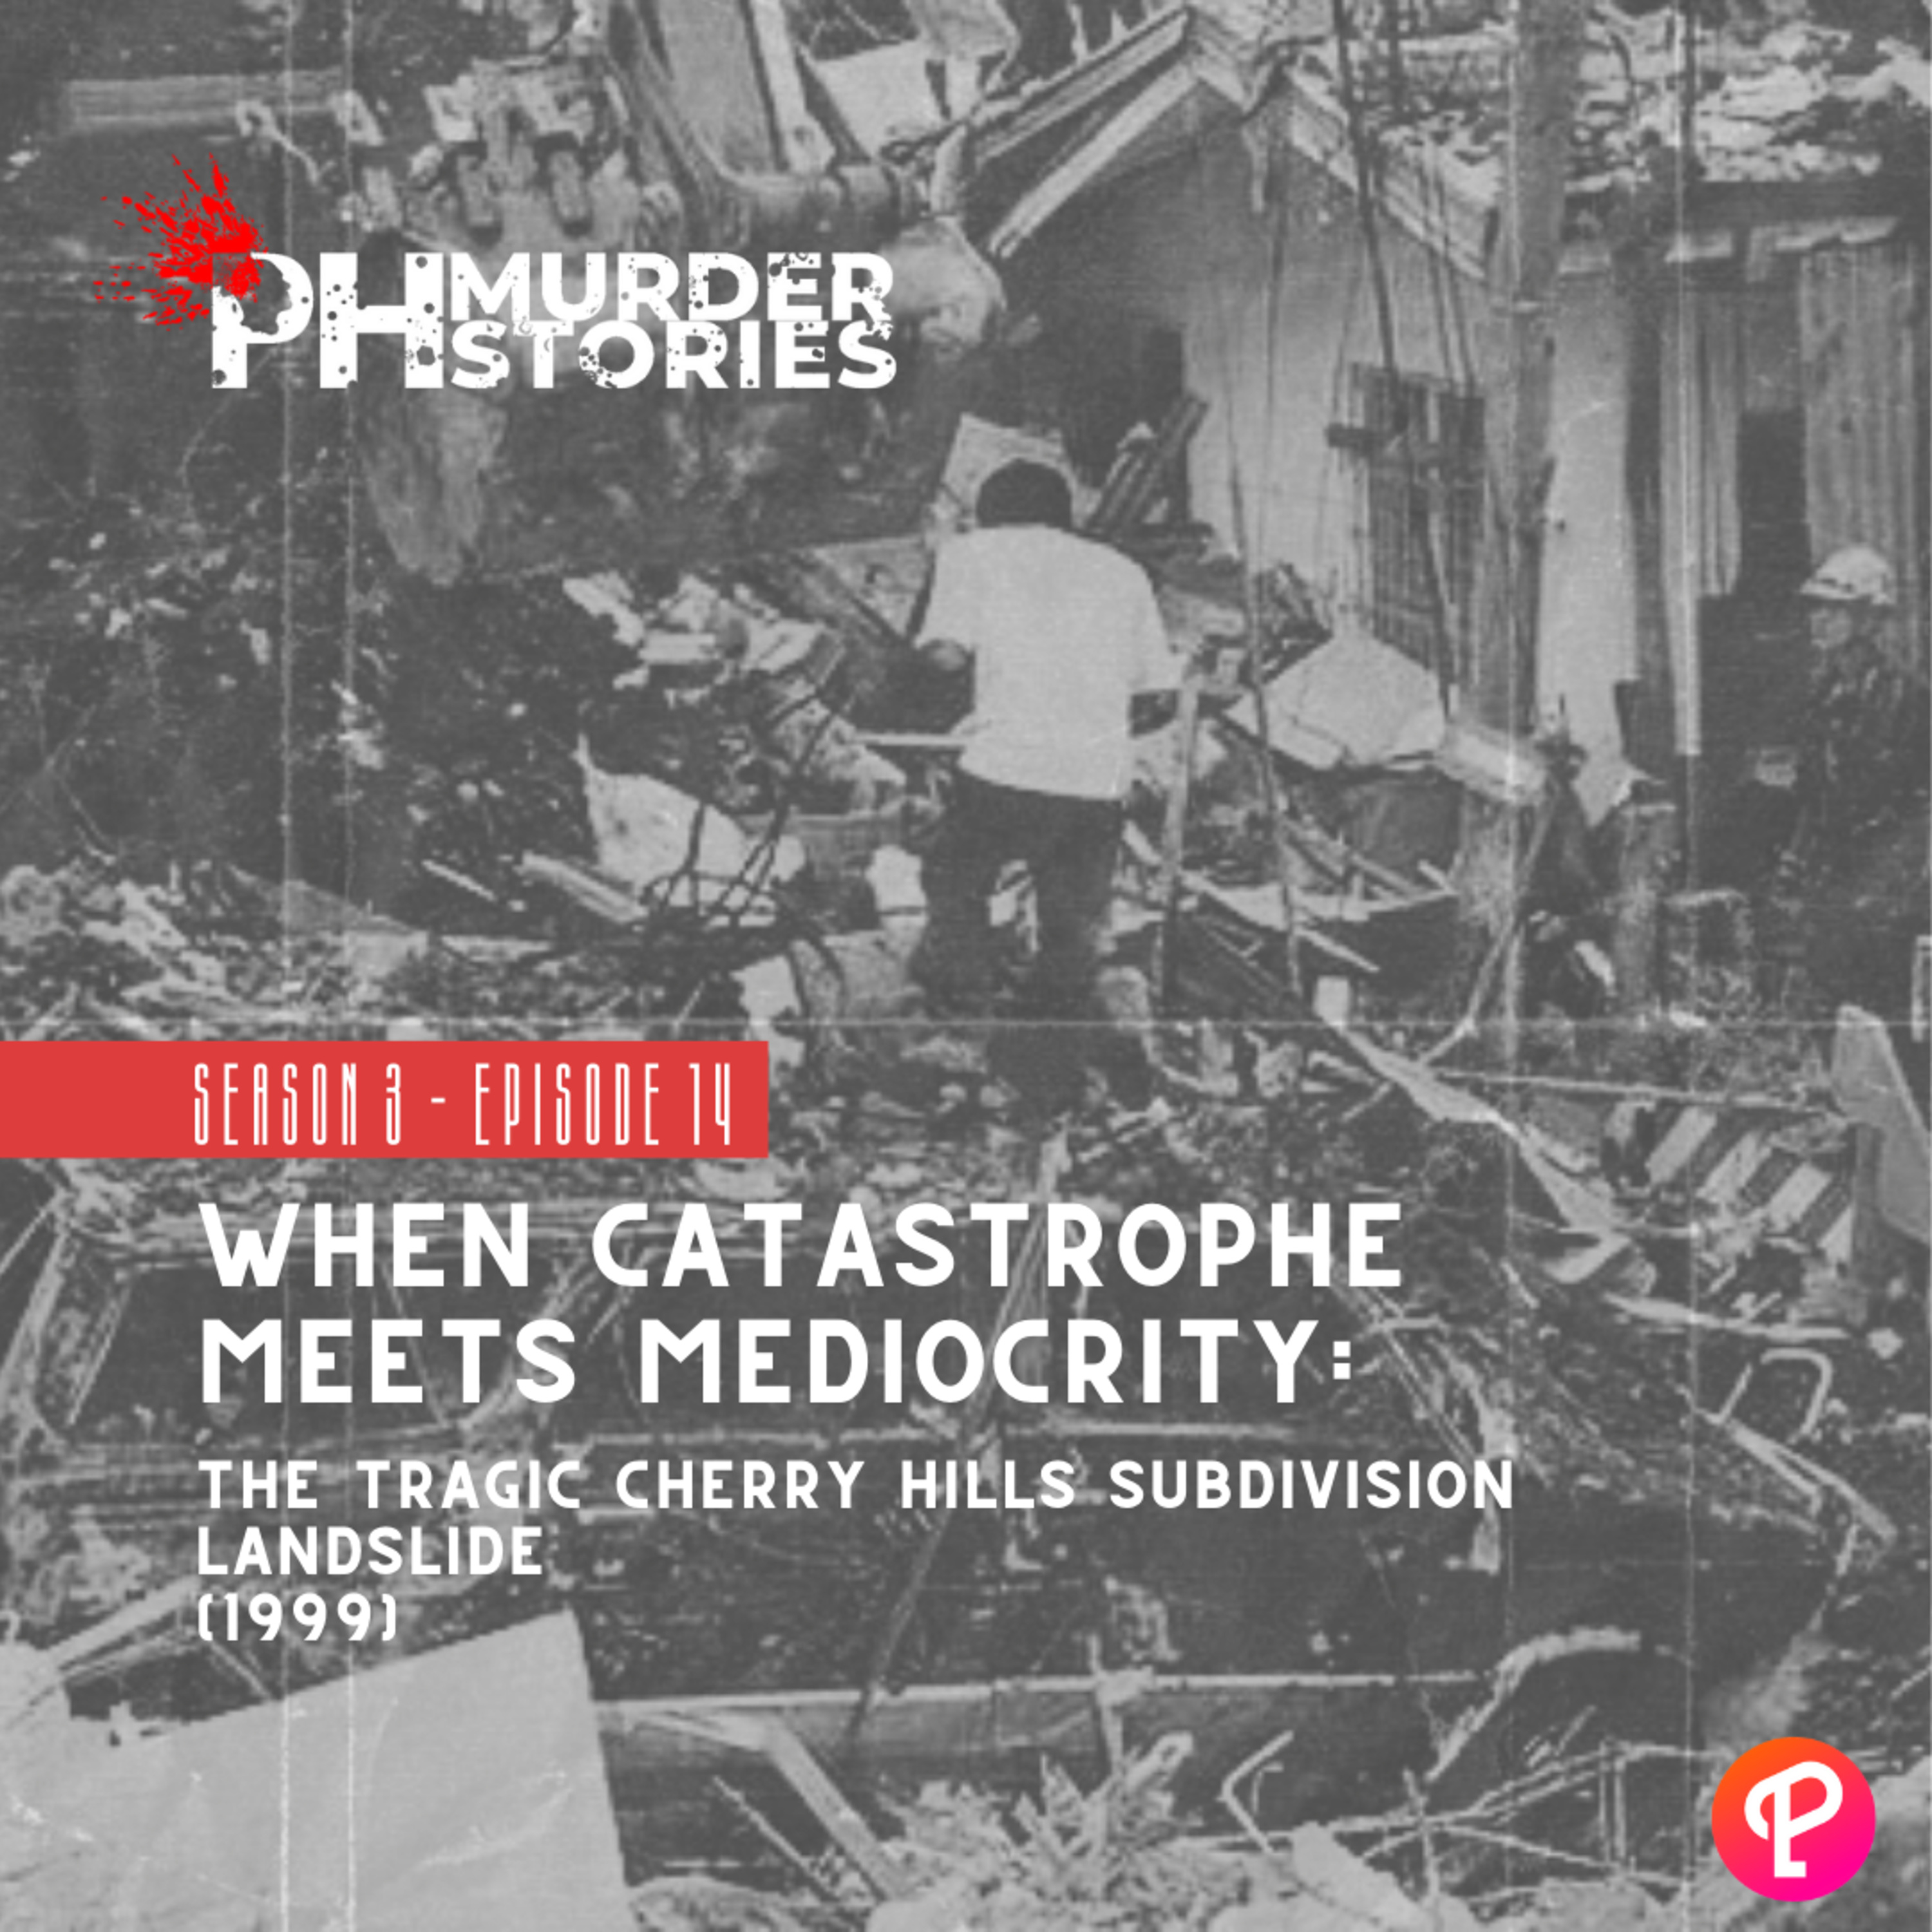 When Catastrophe Meets Mediocrity: The Tragic Cherry Hills Subdivision Landslide (1999)